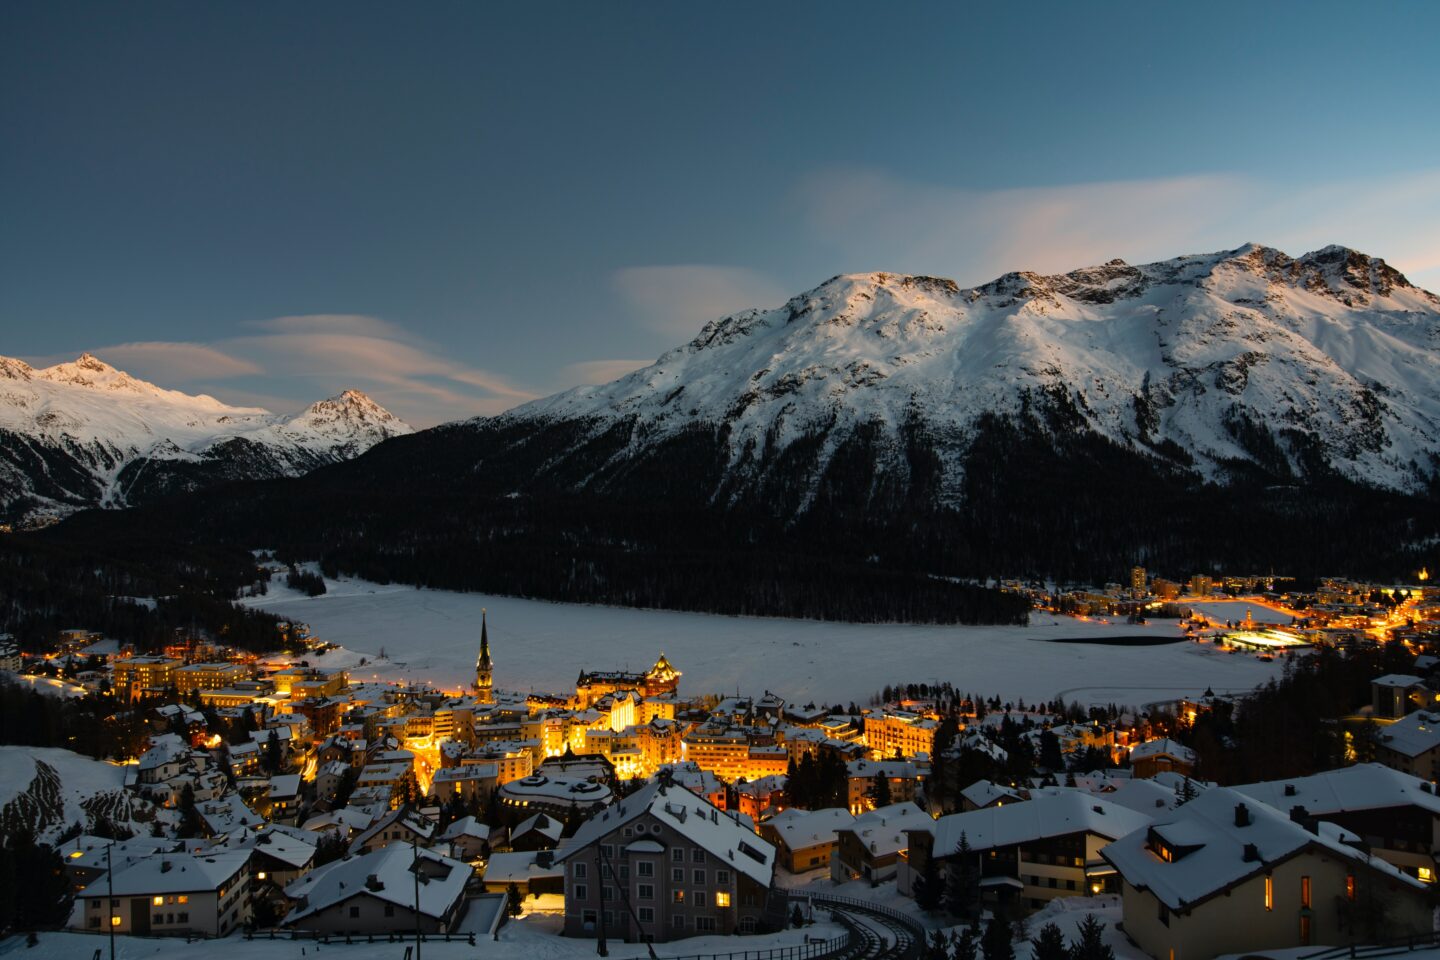 snow covered ski village in europe, chalets, lake and mountains at night, chalets with orange lights illuminated